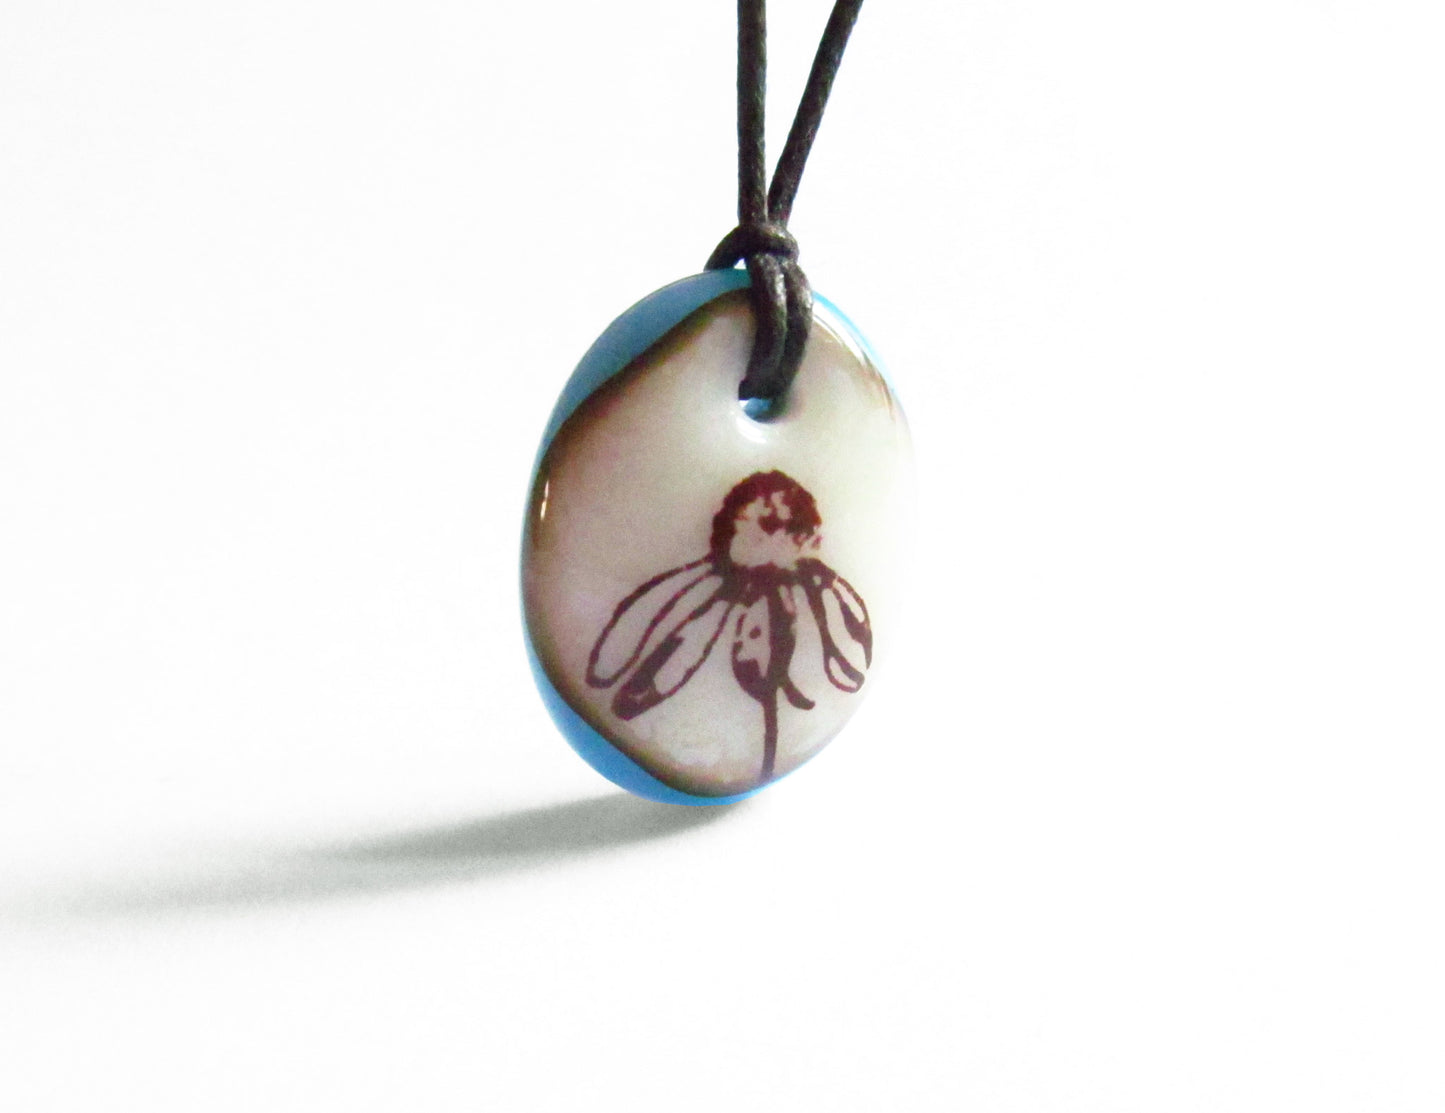 Wildflower Necklace in rustic aqua blue and cream colors. 